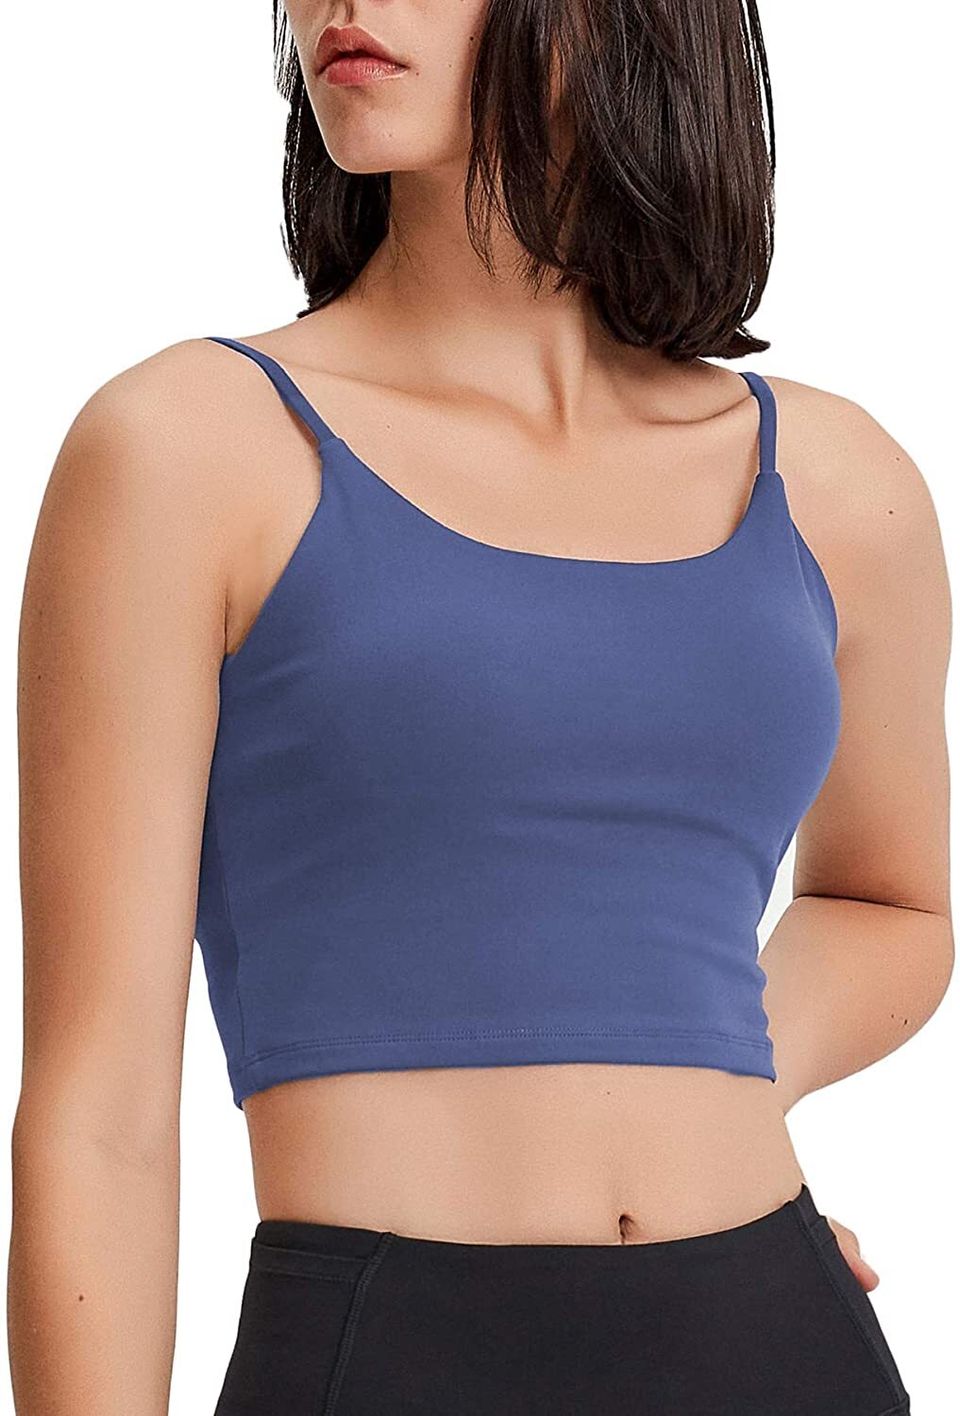 26 Pieces Of Workout Clothing That Look Great On